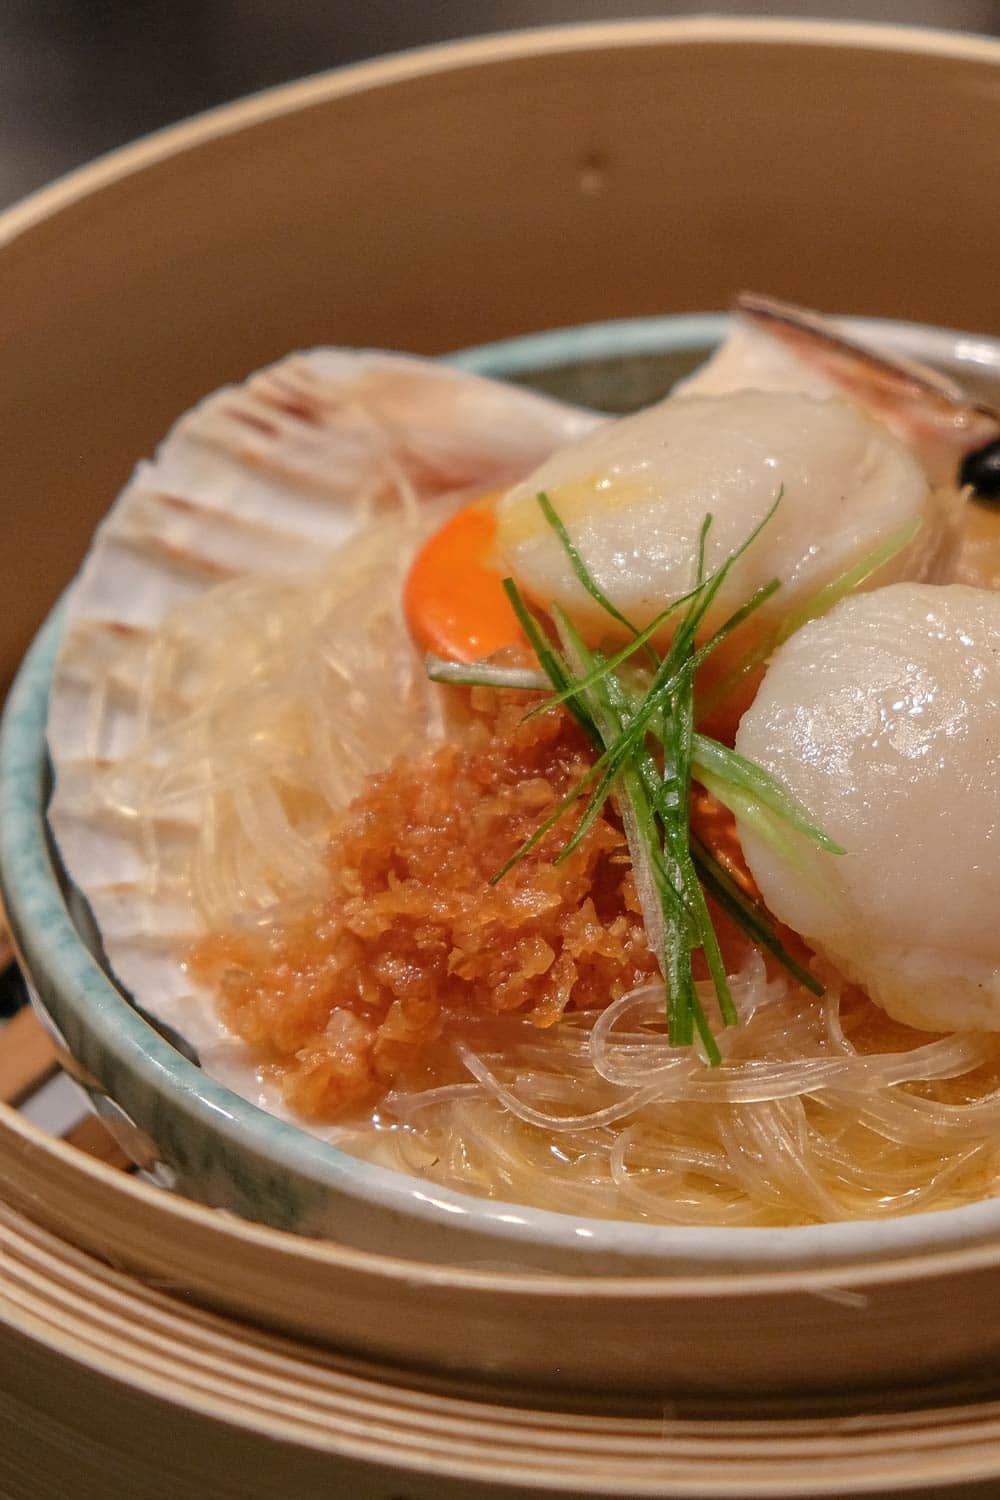 Steamed scallops with glass noodles and fried garlic